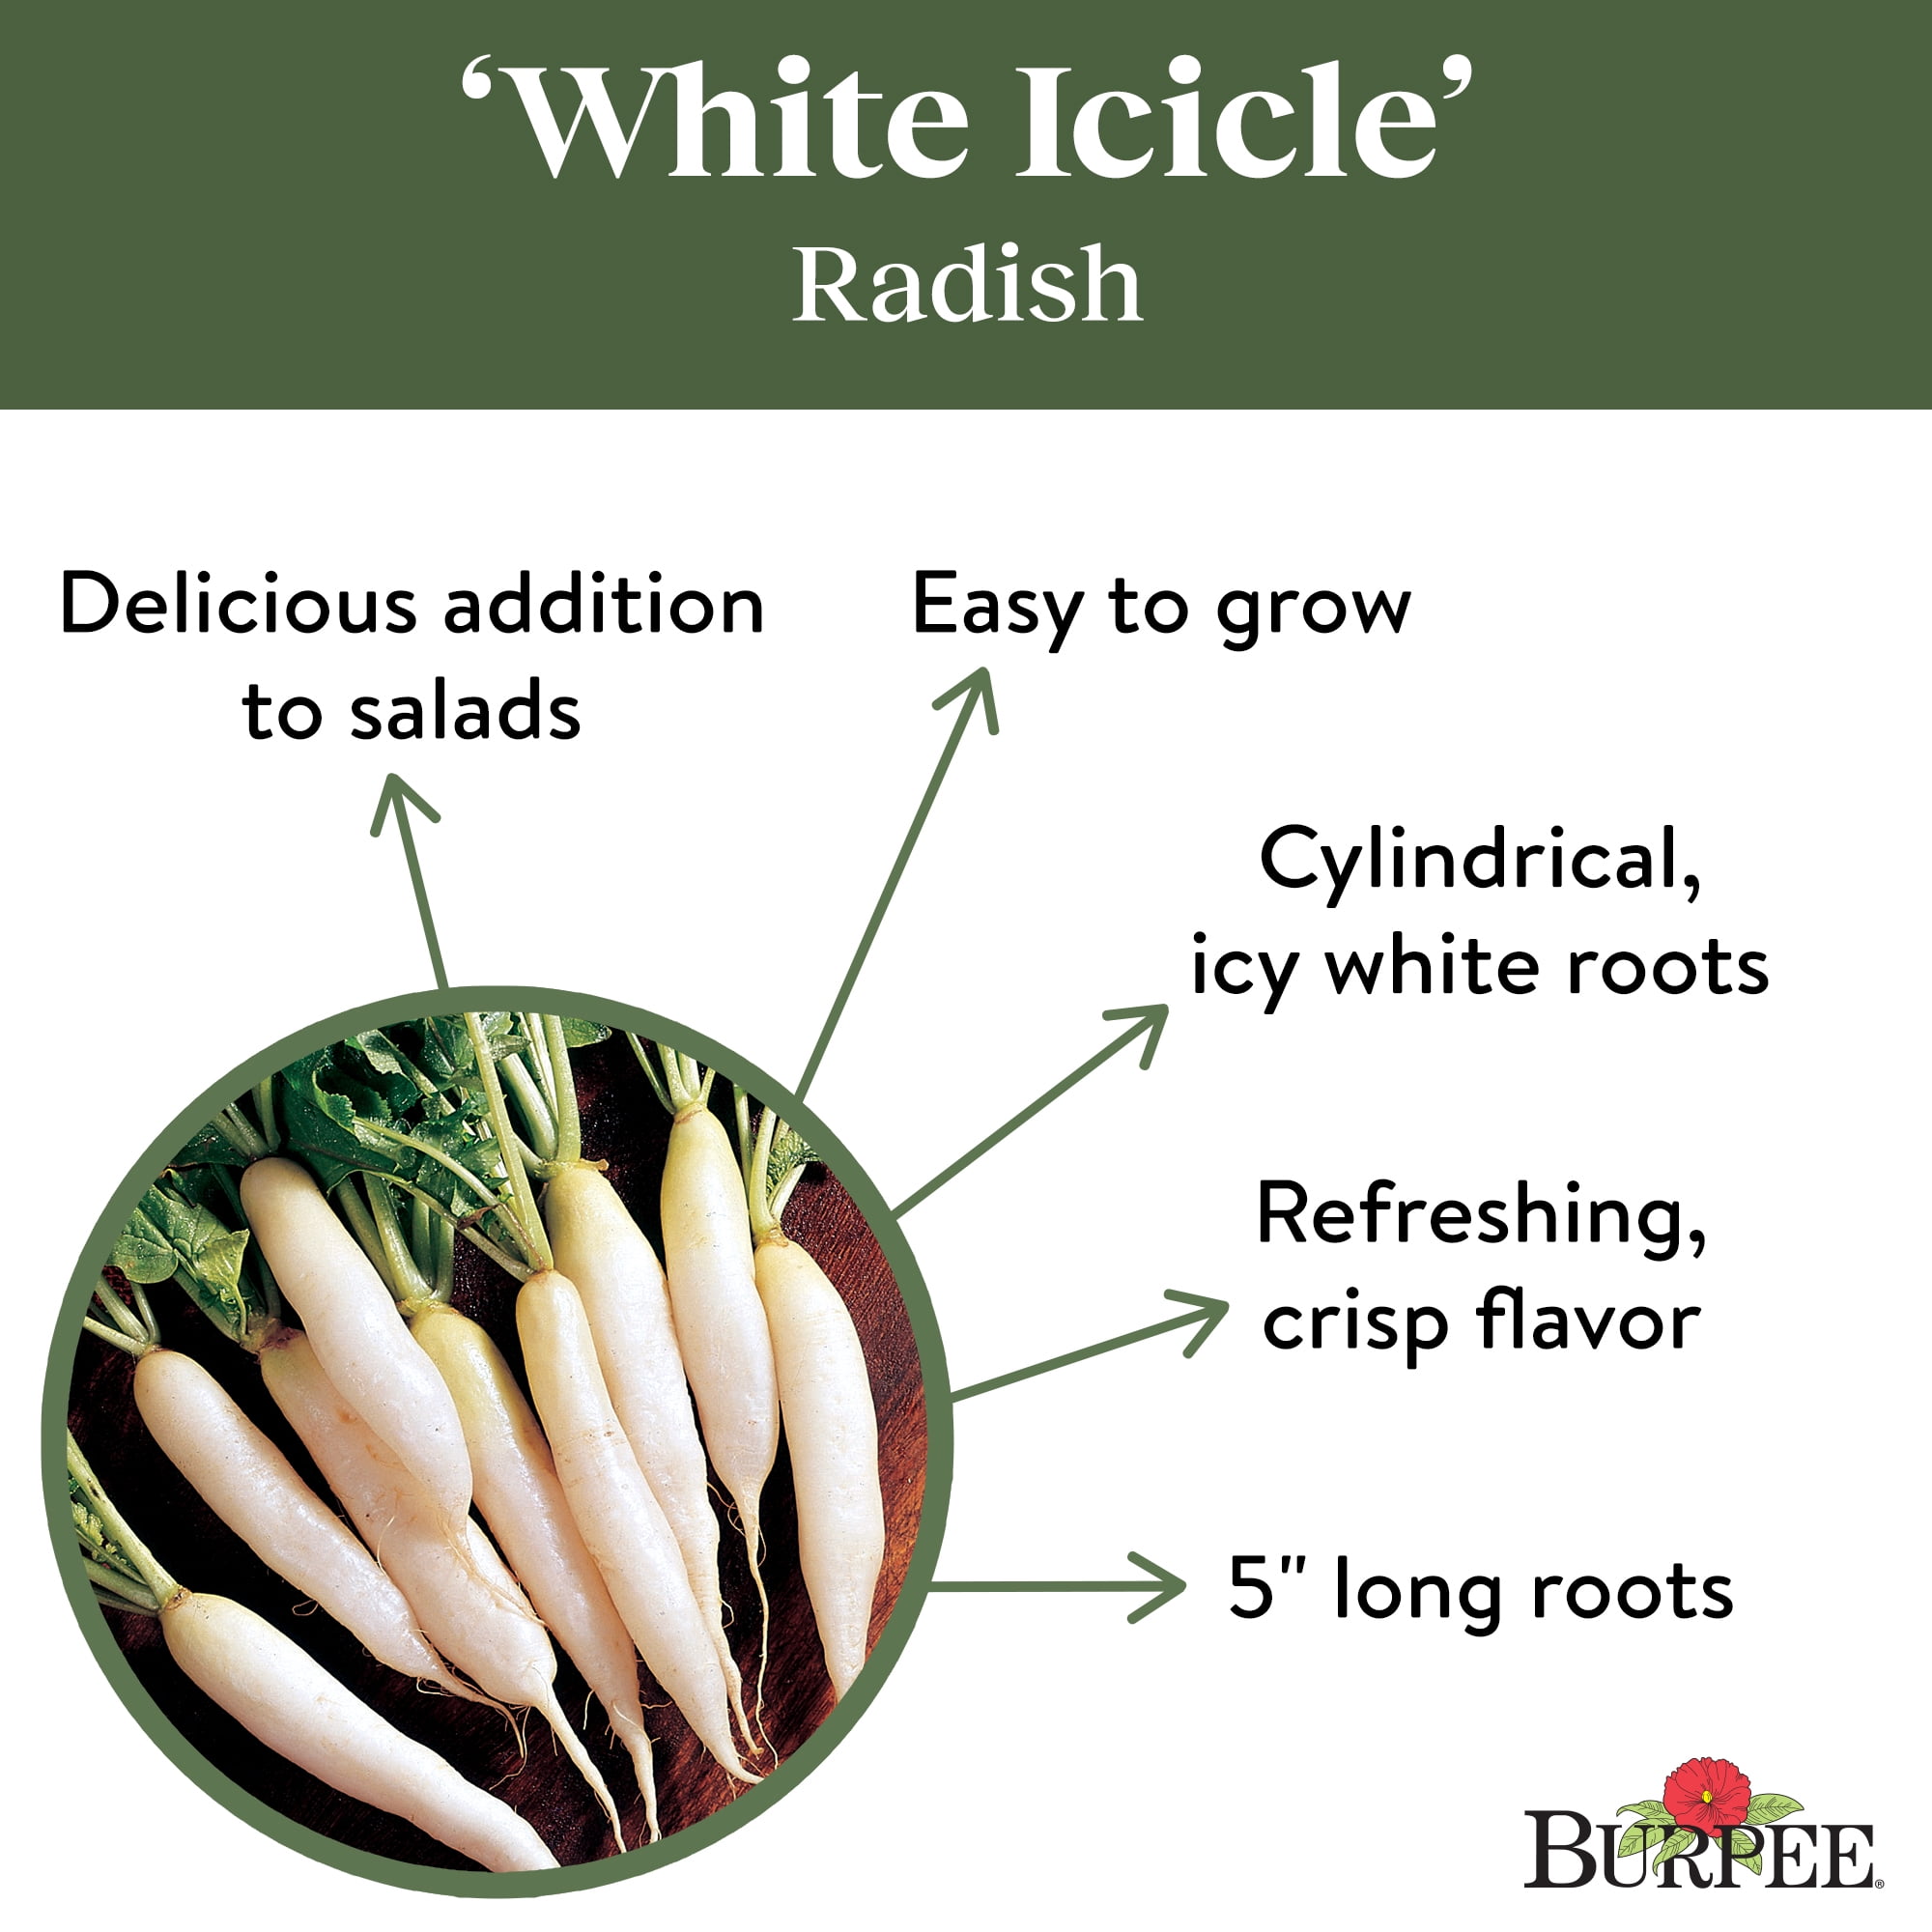 Get Crunchy with White Icicle Radish: A Delicious Addition to Your Salads